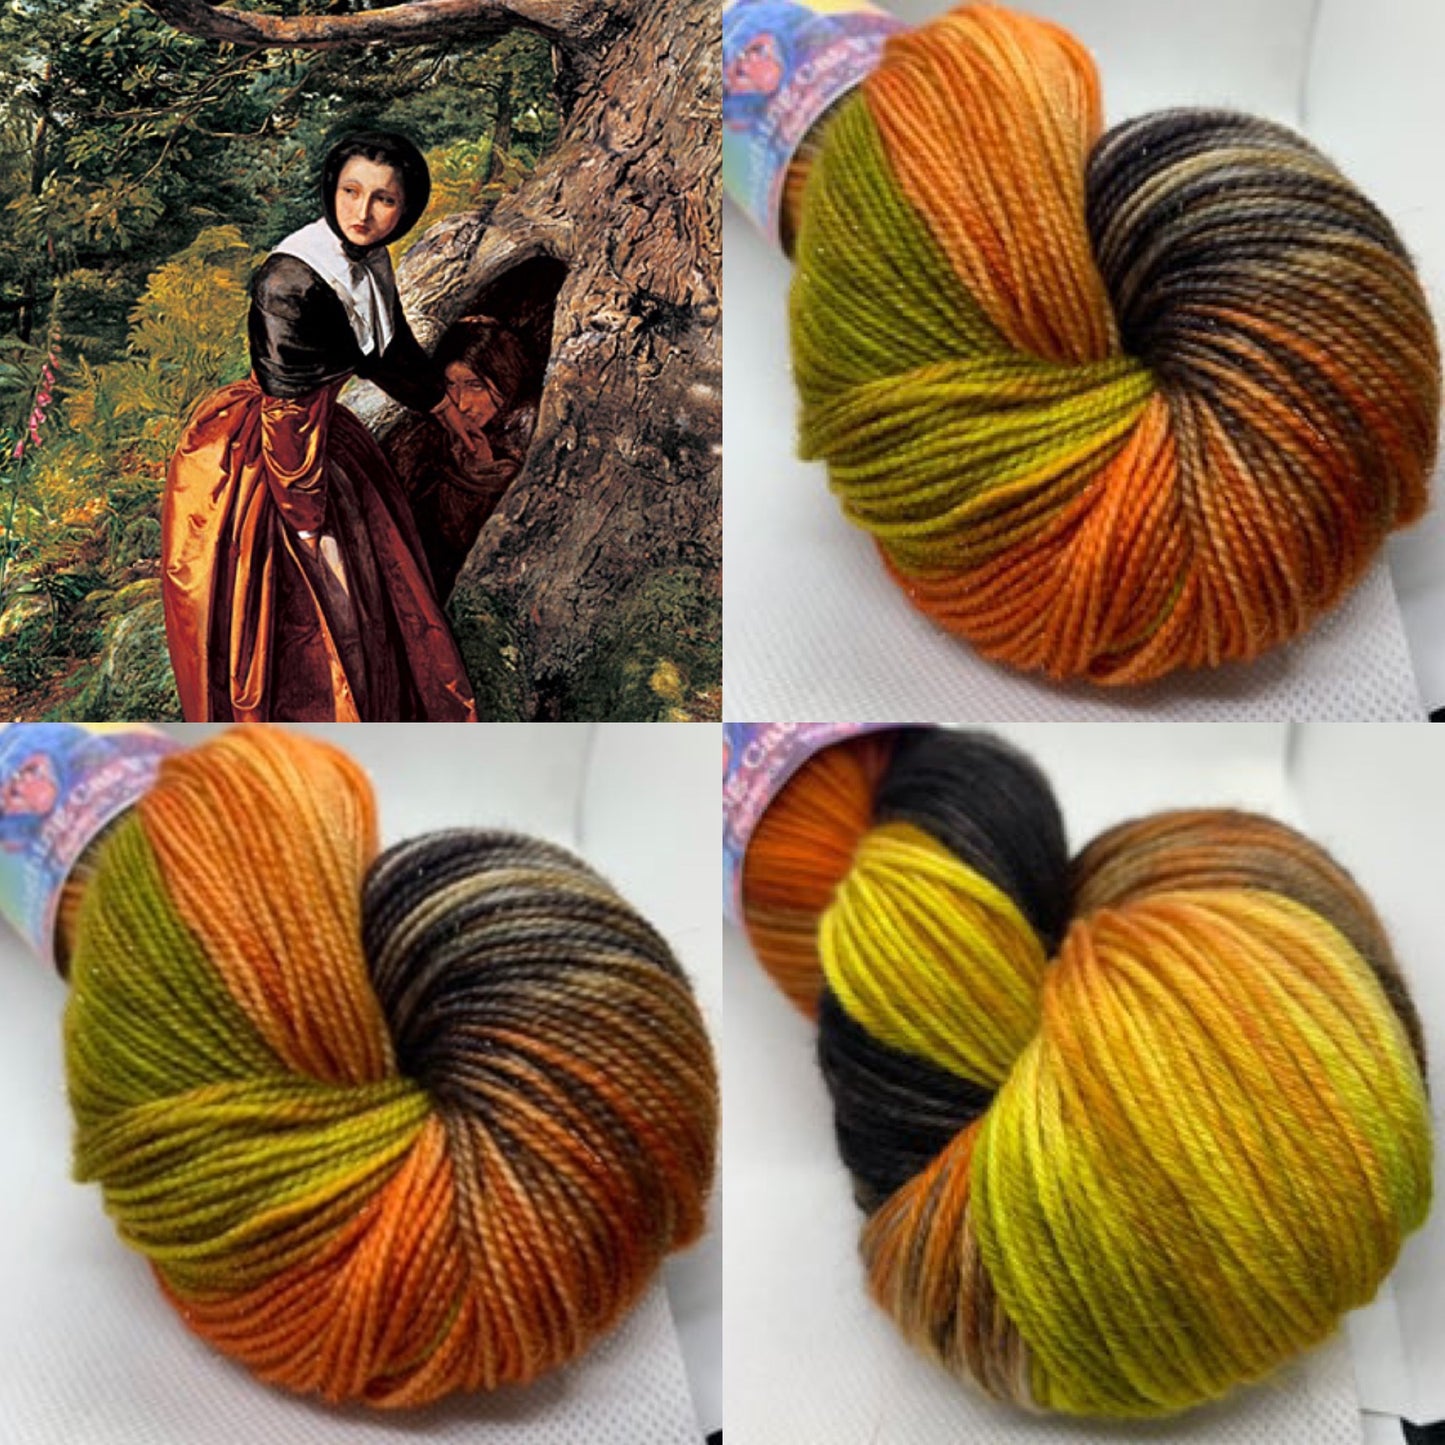 "The Lovers" on Various Yarn Bases